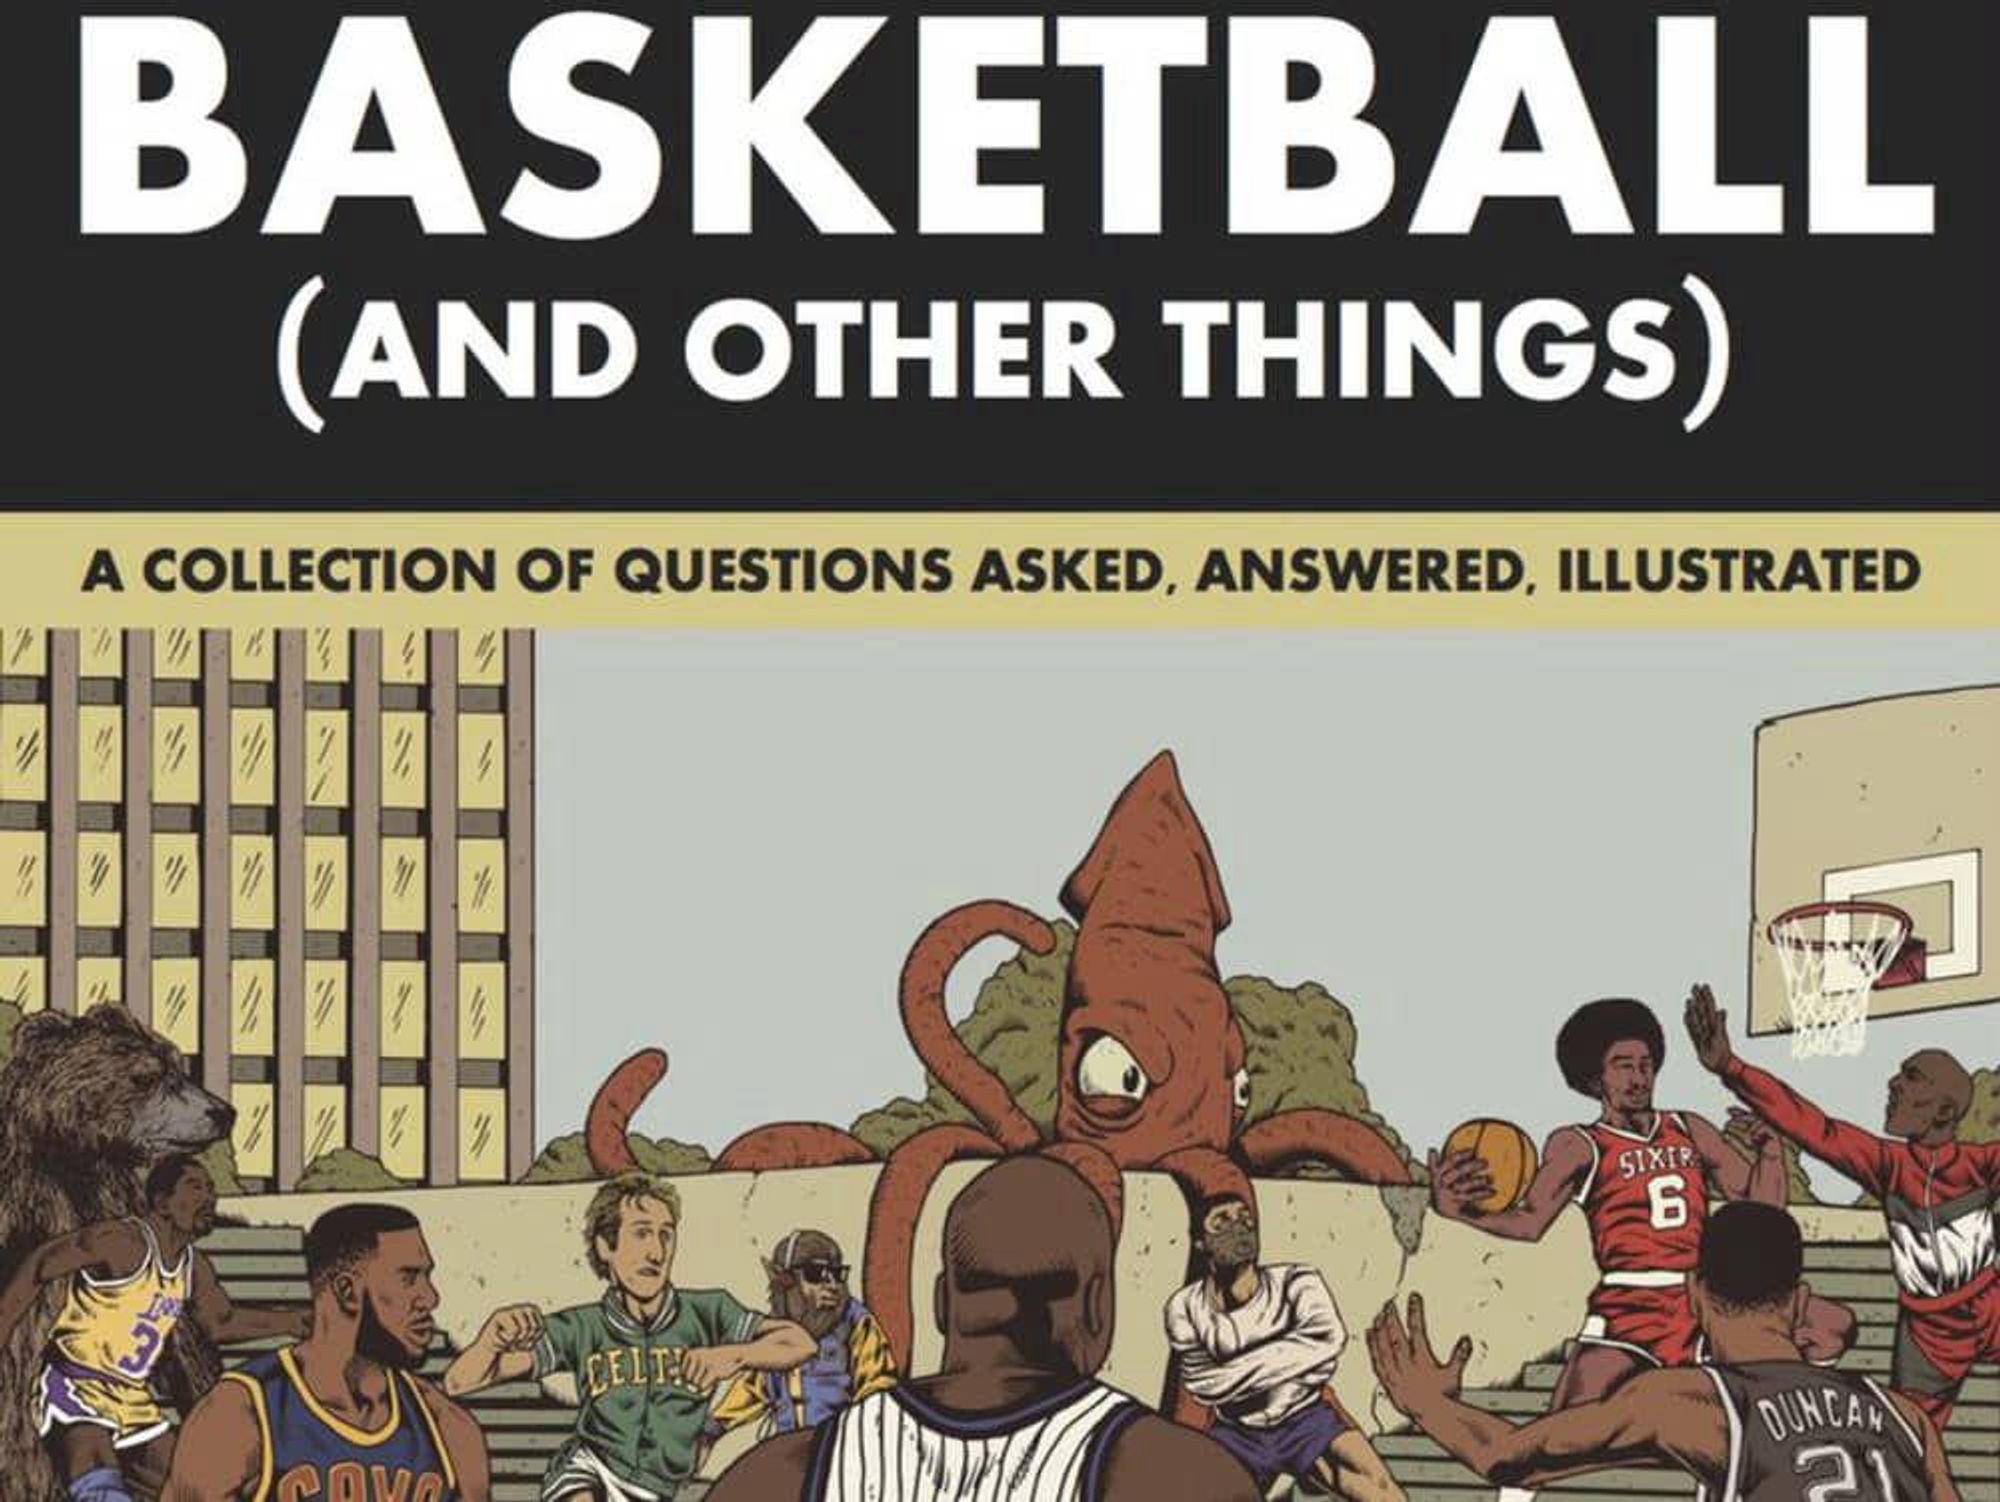 Shea Serrano book Basketball and Other Things